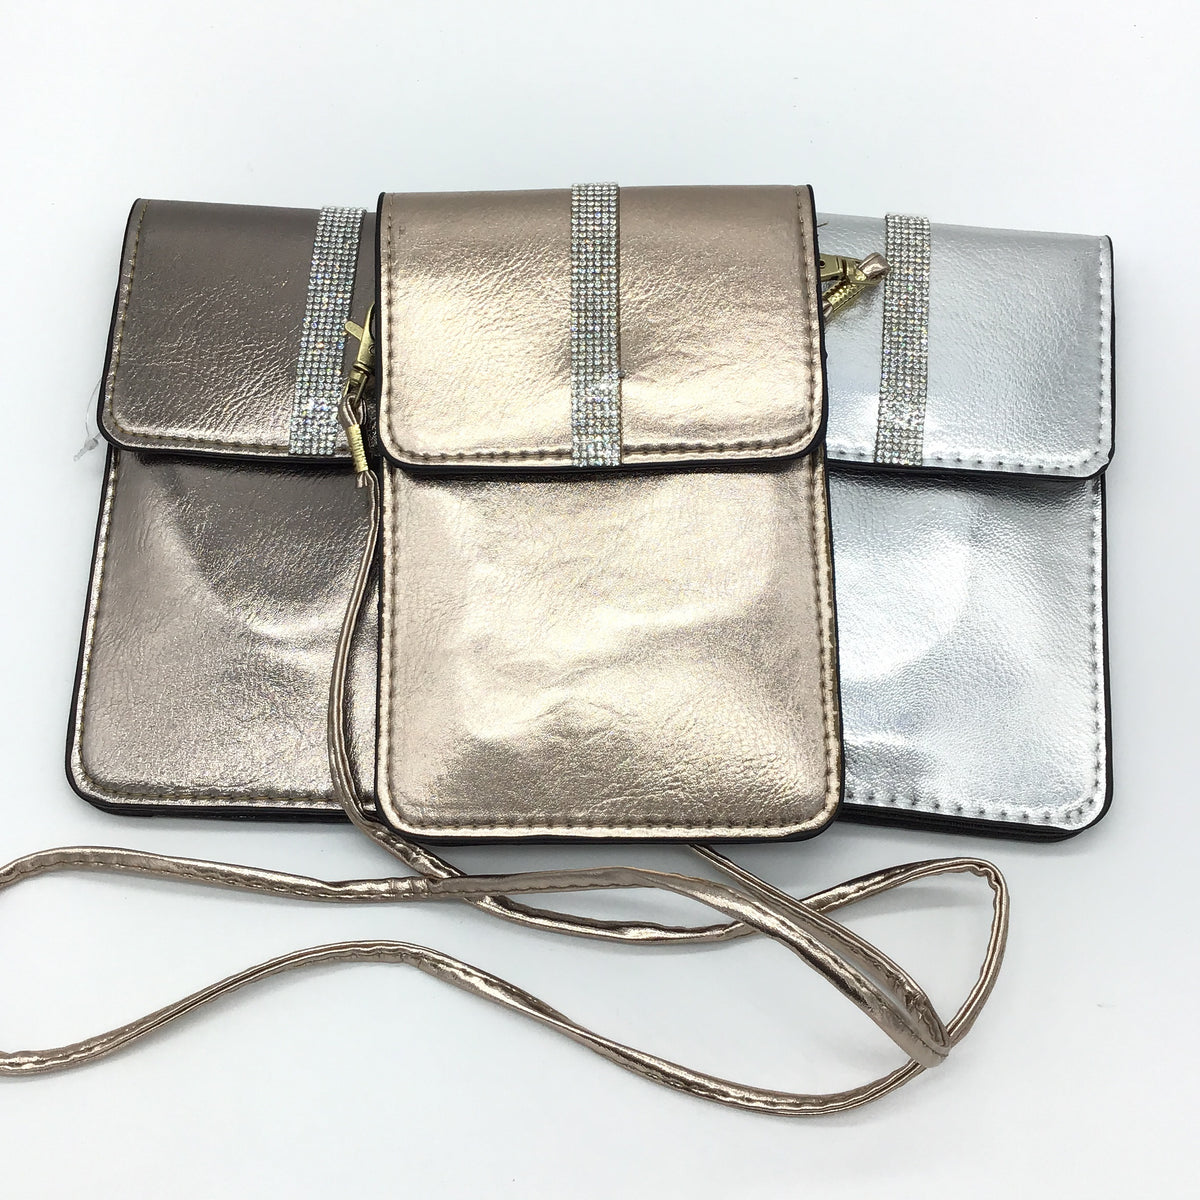 Phone Window Cross Body Bag with Bling-Lola Monroe Boutique